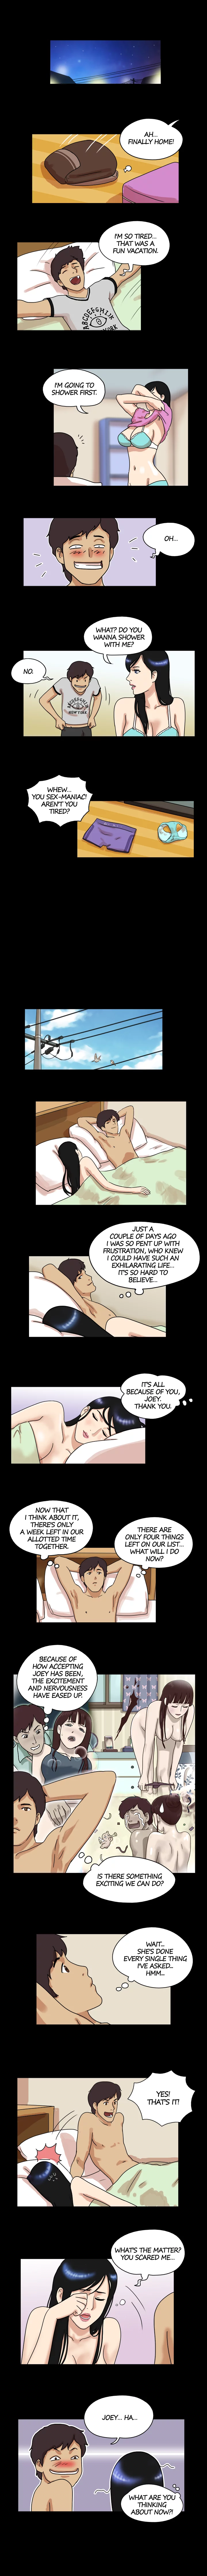 17 Sex Fantasies - Chapter 37 Page 2